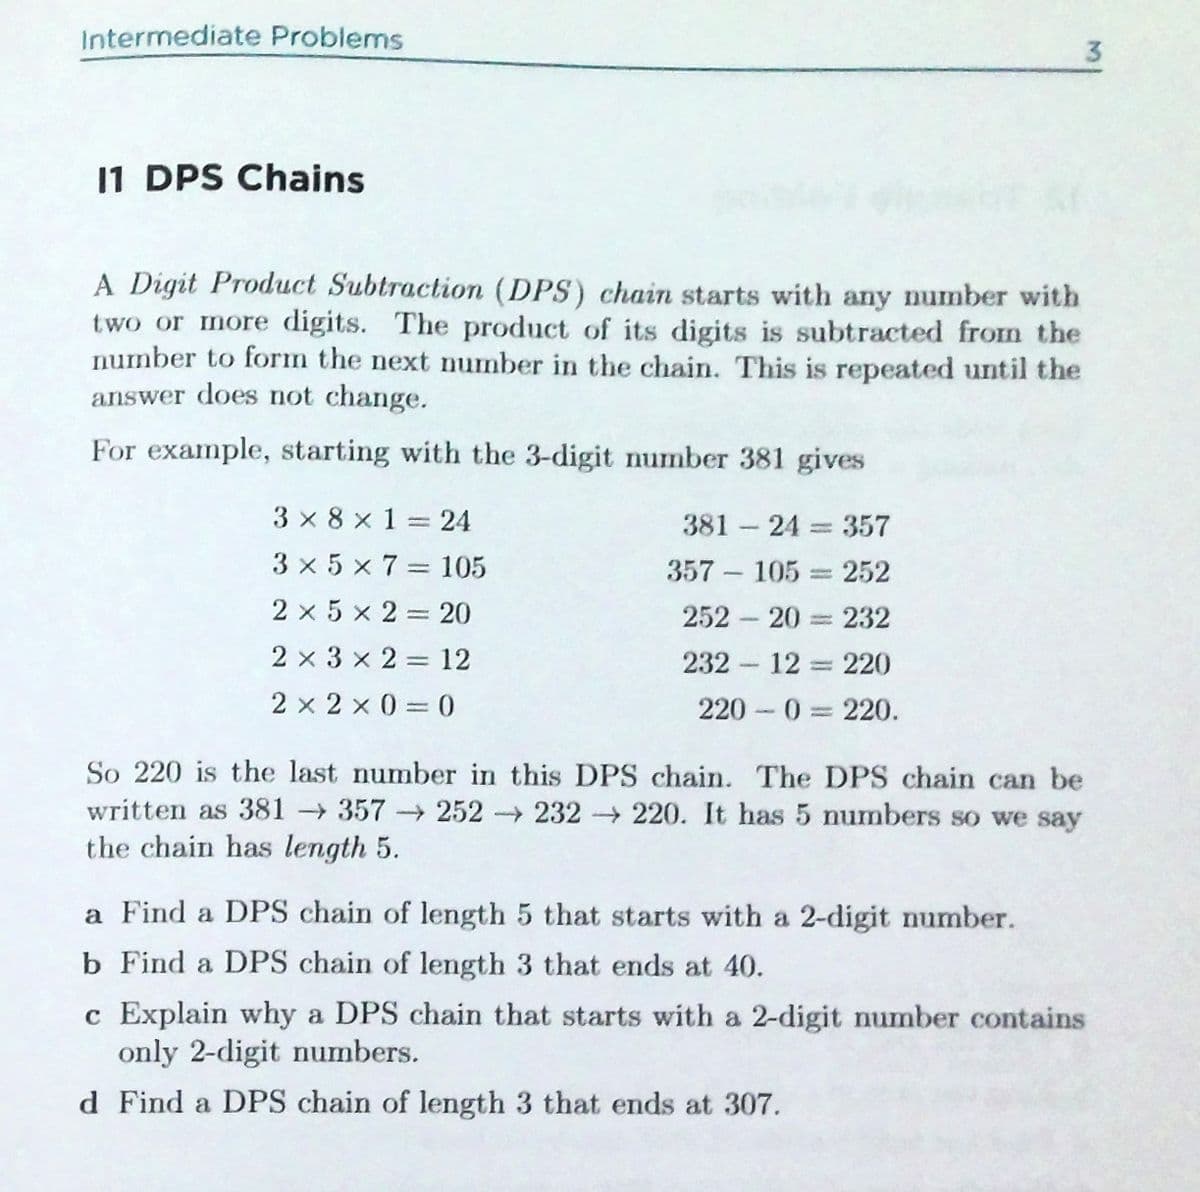 Intermediate Problems
3.
11 DPS Chains
A Digit Product Subtraction (DPS) chain starts with any number with
two or more digits. The product of its digits is subtracted from the
number to form the next number in the chain. This is repeated until the
answer does not change.
For example, starting with the 3-digit number 381 gives
3 x 8 x 1=24
381 24 357
3 x 5 x 7= 105
357 – 105 = 252
2 x 5 x 2 = 20
252 20 232
2 x 3 x 2 = 12
232 12 220
%3D
2 x 2 x 0 = 0
220 0 220.
So 220 is the last number in this DPS chain. The DPS chain can be
written as 381 357→252 232 220. It has 5 numbers so we say
the chain has length 5.
a Find a DPS chain of length 5 that starts with a 2-digit number.
b Find a DPS chain of length 3 that ends at 40.
c Explain why a DPS chain that starts with a 2-digit number contains
only 2-digit numbers.
d Find a DPS chain of length 3 that ends at 307.
